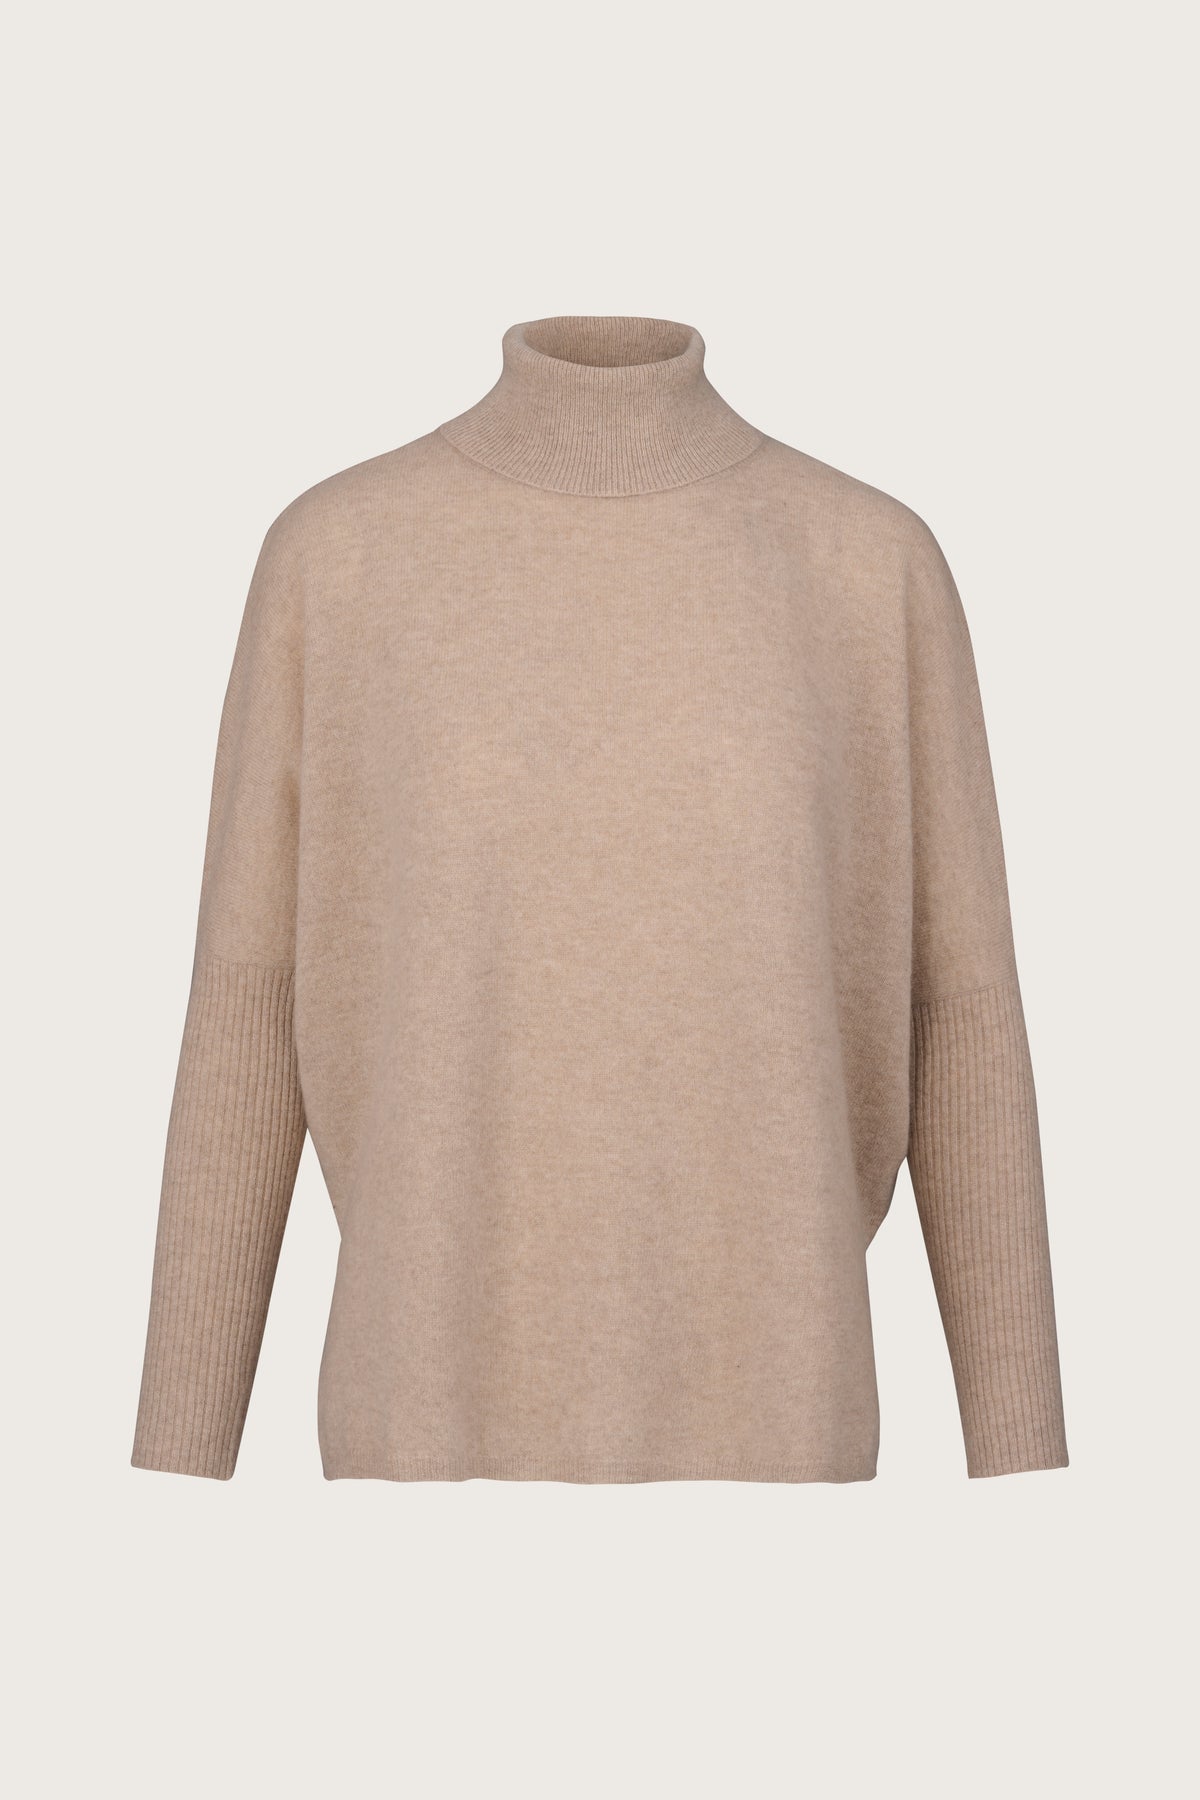 Beige roll neck jumper with dropped shoulders and tight ribbed long sleeves